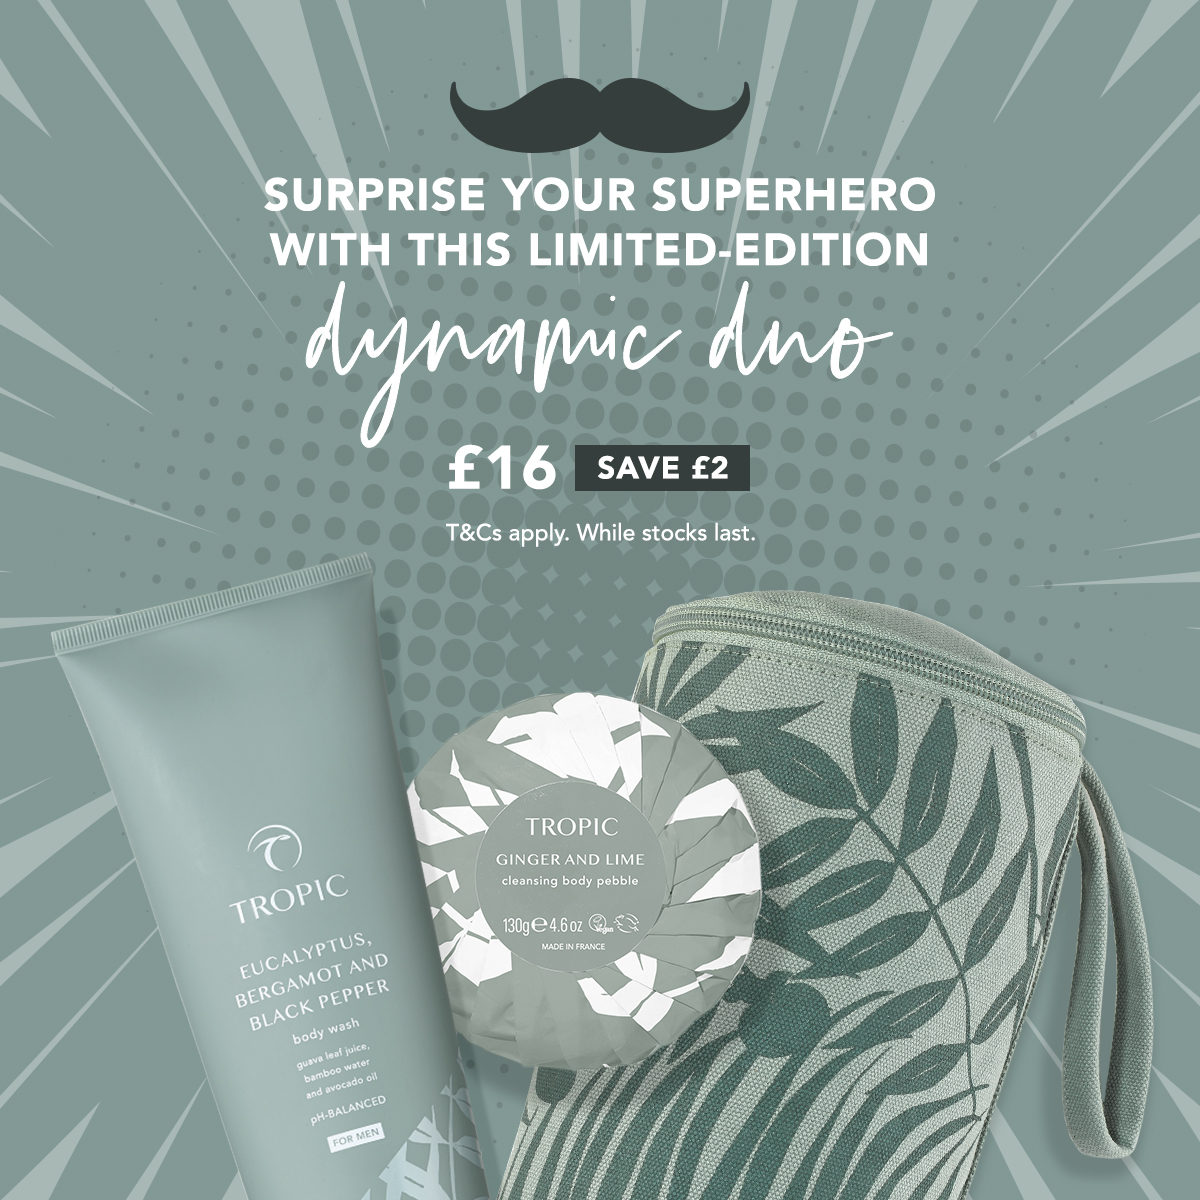 It’s time to show your superhero you care this Father's Day. This limited-edition gift set adds a little lift to every day. Complete with our signature men’s wash bag. Shop now: bit.ly/3HeQwLI Available via the Tropic website, from 7:00am 1st June, while stocks last.